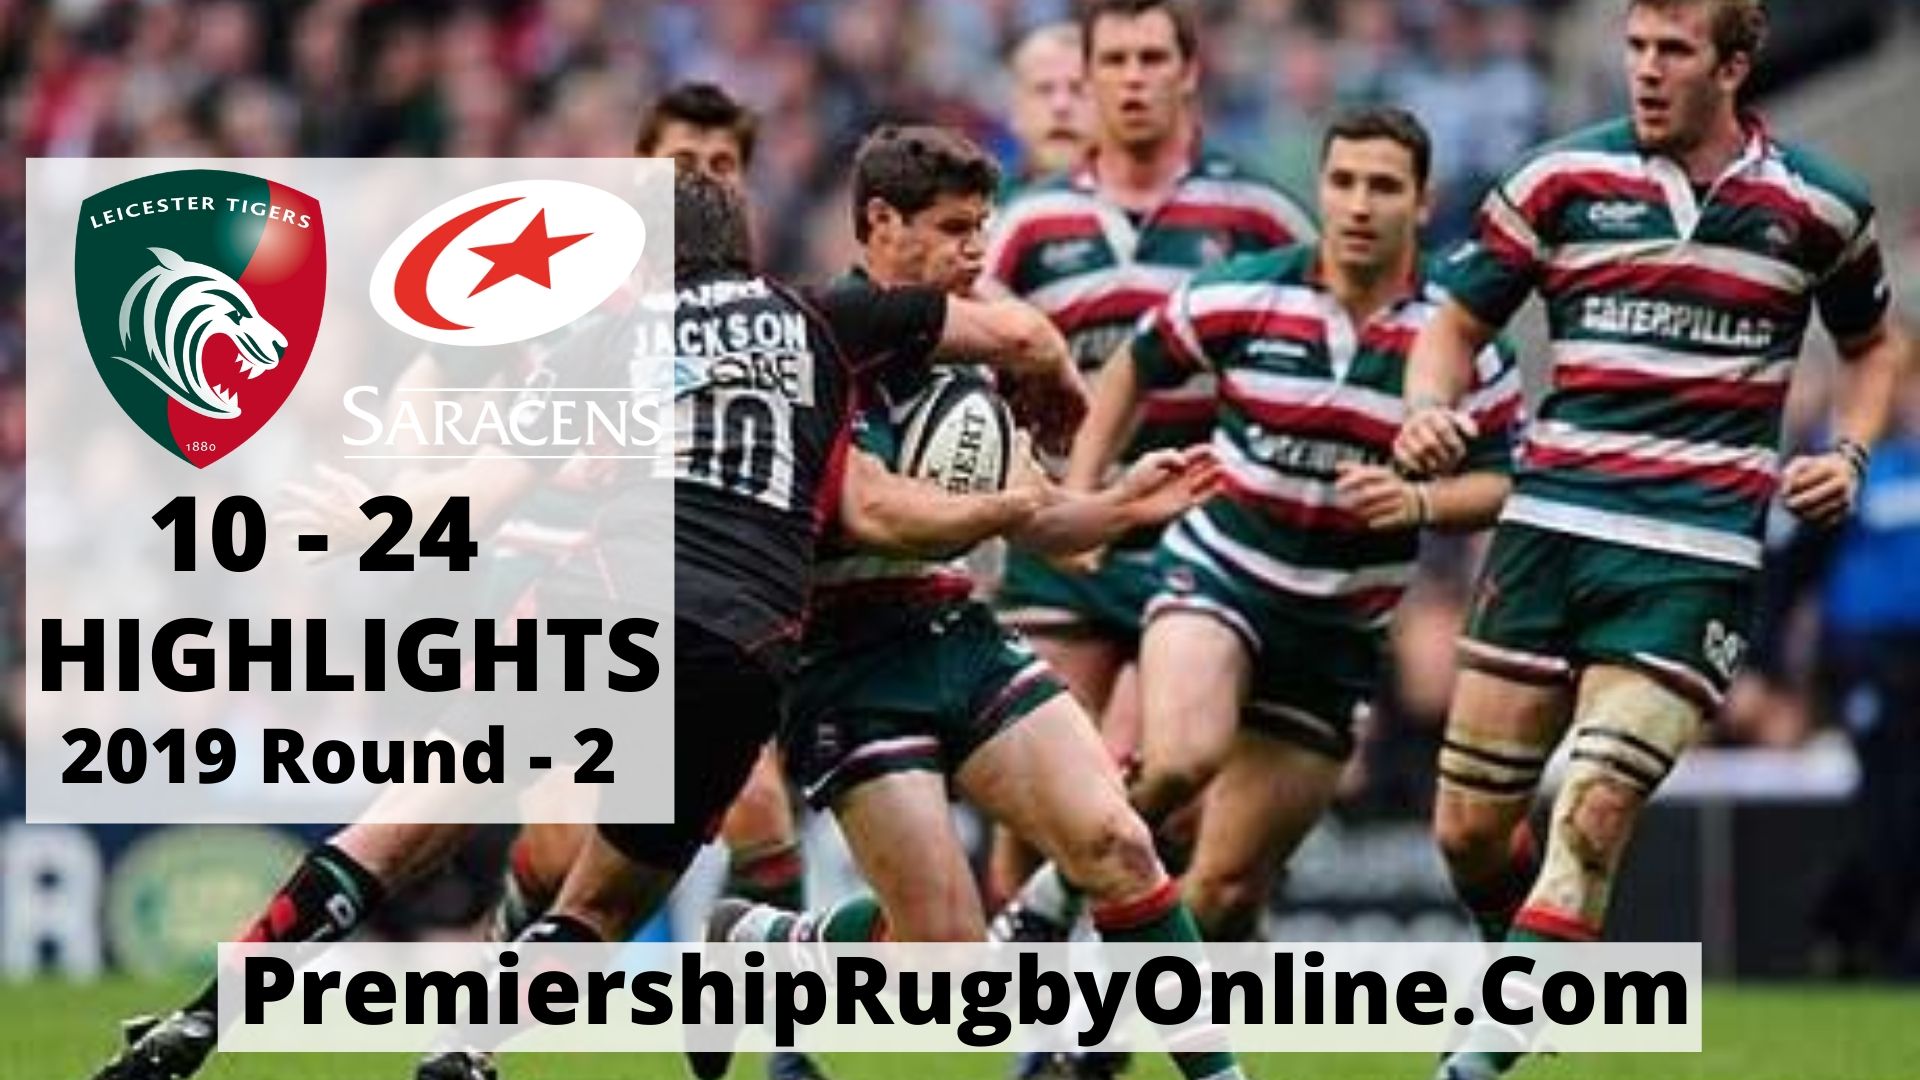 Leicester tigers vs Saracens Highlights 2019 Round 2